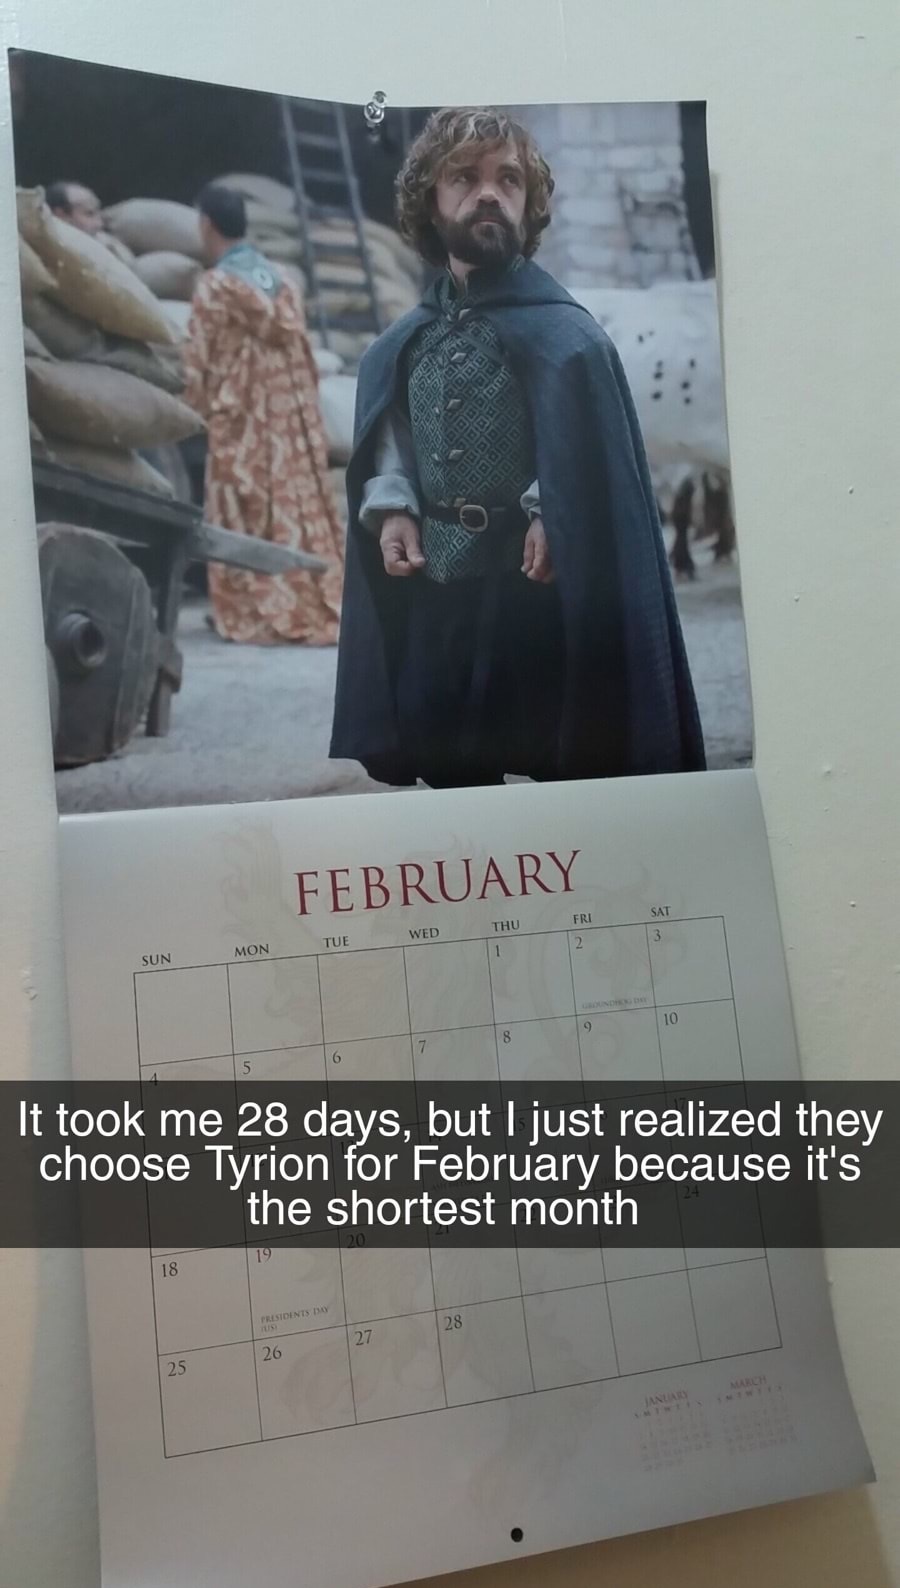 shortest month calendar - Be Tedd February Sat Fri Thu Wed Mon Tue Sun It took me 28 days, but I just realized they choose Tyrion for February because it's the shortest month Presidents 28 21 26 January